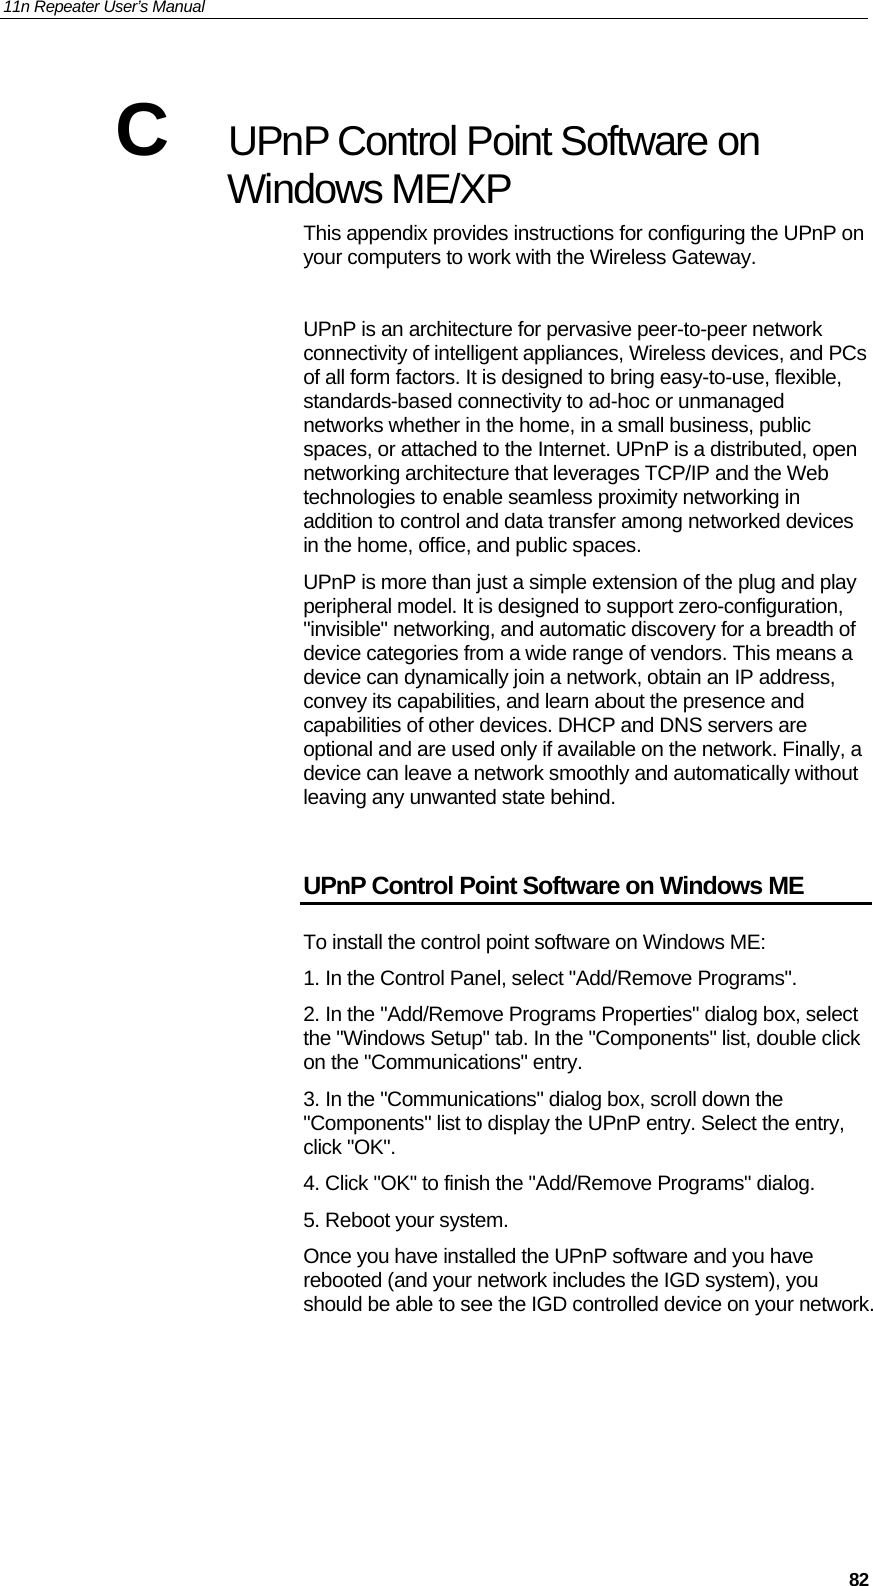 11n Repeater User’s Manual     82C  UPnP Control Point Software on Windows ME/XP This appendix provides instructions for configuring the UPnP on your computers to work with the Wireless Gateway.   UPnP is an architecture for pervasive peer-to-peer network connectivity of intelligent appliances, Wireless devices, and PCs of all form factors. It is designed to bring easy-to-use, flexible, standards-based connectivity to ad-hoc or unmanaged networks whether in the home, in a small business, public spaces, or attached to the Internet. UPnP is a distributed, open networking architecture that leverages TCP/IP and the Web technologies to enable seamless proximity networking in addition to control and data transfer among networked devices in the home, office, and public spaces. UPnP is more than just a simple extension of the plug and play peripheral model. It is designed to support zero-configuration, &quot;invisible&quot; networking, and automatic discovery for a breadth of device categories from a wide range of vendors. This means a device can dynamically join a network, obtain an IP address, convey its capabilities, and learn about the presence and capabilities of other devices. DHCP and DNS servers are optional and are used only if available on the network. Finally, a device can leave a network smoothly and automatically without leaving any unwanted state behind.  UPnP Control Point Software on Windows ME To install the control point software on Windows ME:  1. In the Control Panel, select &quot;Add/Remove Programs&quot;.  2. In the &quot;Add/Remove Programs Properties&quot; dialog box, select the &quot;Windows Setup&quot; tab. In the &quot;Components&quot; list, double click on the &quot;Communications&quot; entry.  3. In the &quot;Communications&quot; dialog box, scroll down the &quot;Components&quot; list to display the UPnP entry. Select the entry, click &quot;OK&quot;.  4. Click &quot;OK&quot; to finish the &quot;Add/Remove Programs&quot; dialog.  5. Reboot your system. Once you have installed the UPnP software and you have rebooted (and your network includes the IGD system), you should be able to see the IGD controlled device on your network.   